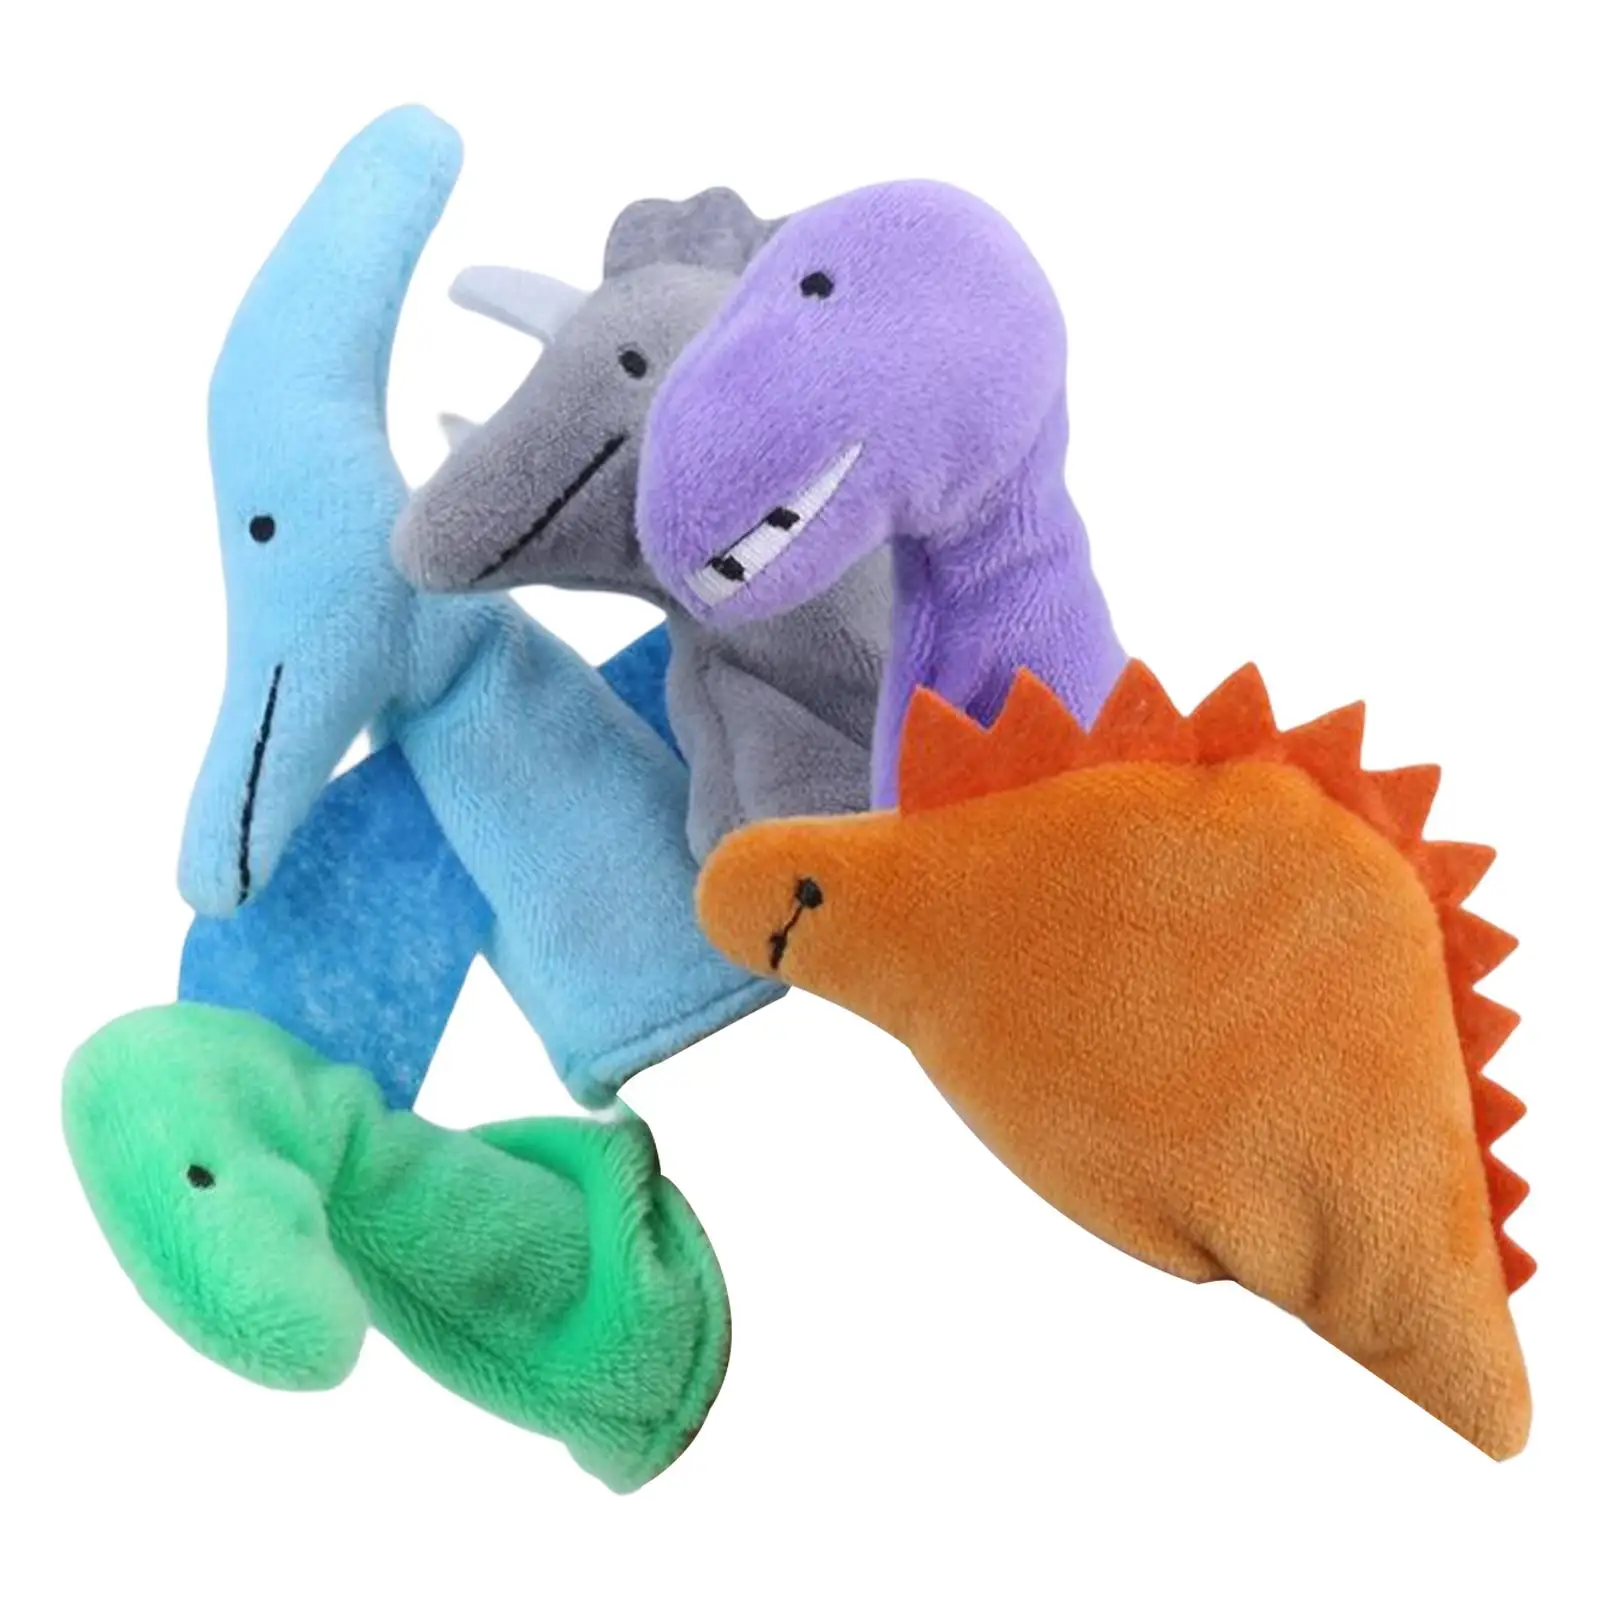 5pcs Animal Finger Puppets Cloth Doll Educational Hand Toy Set for Kid Baby